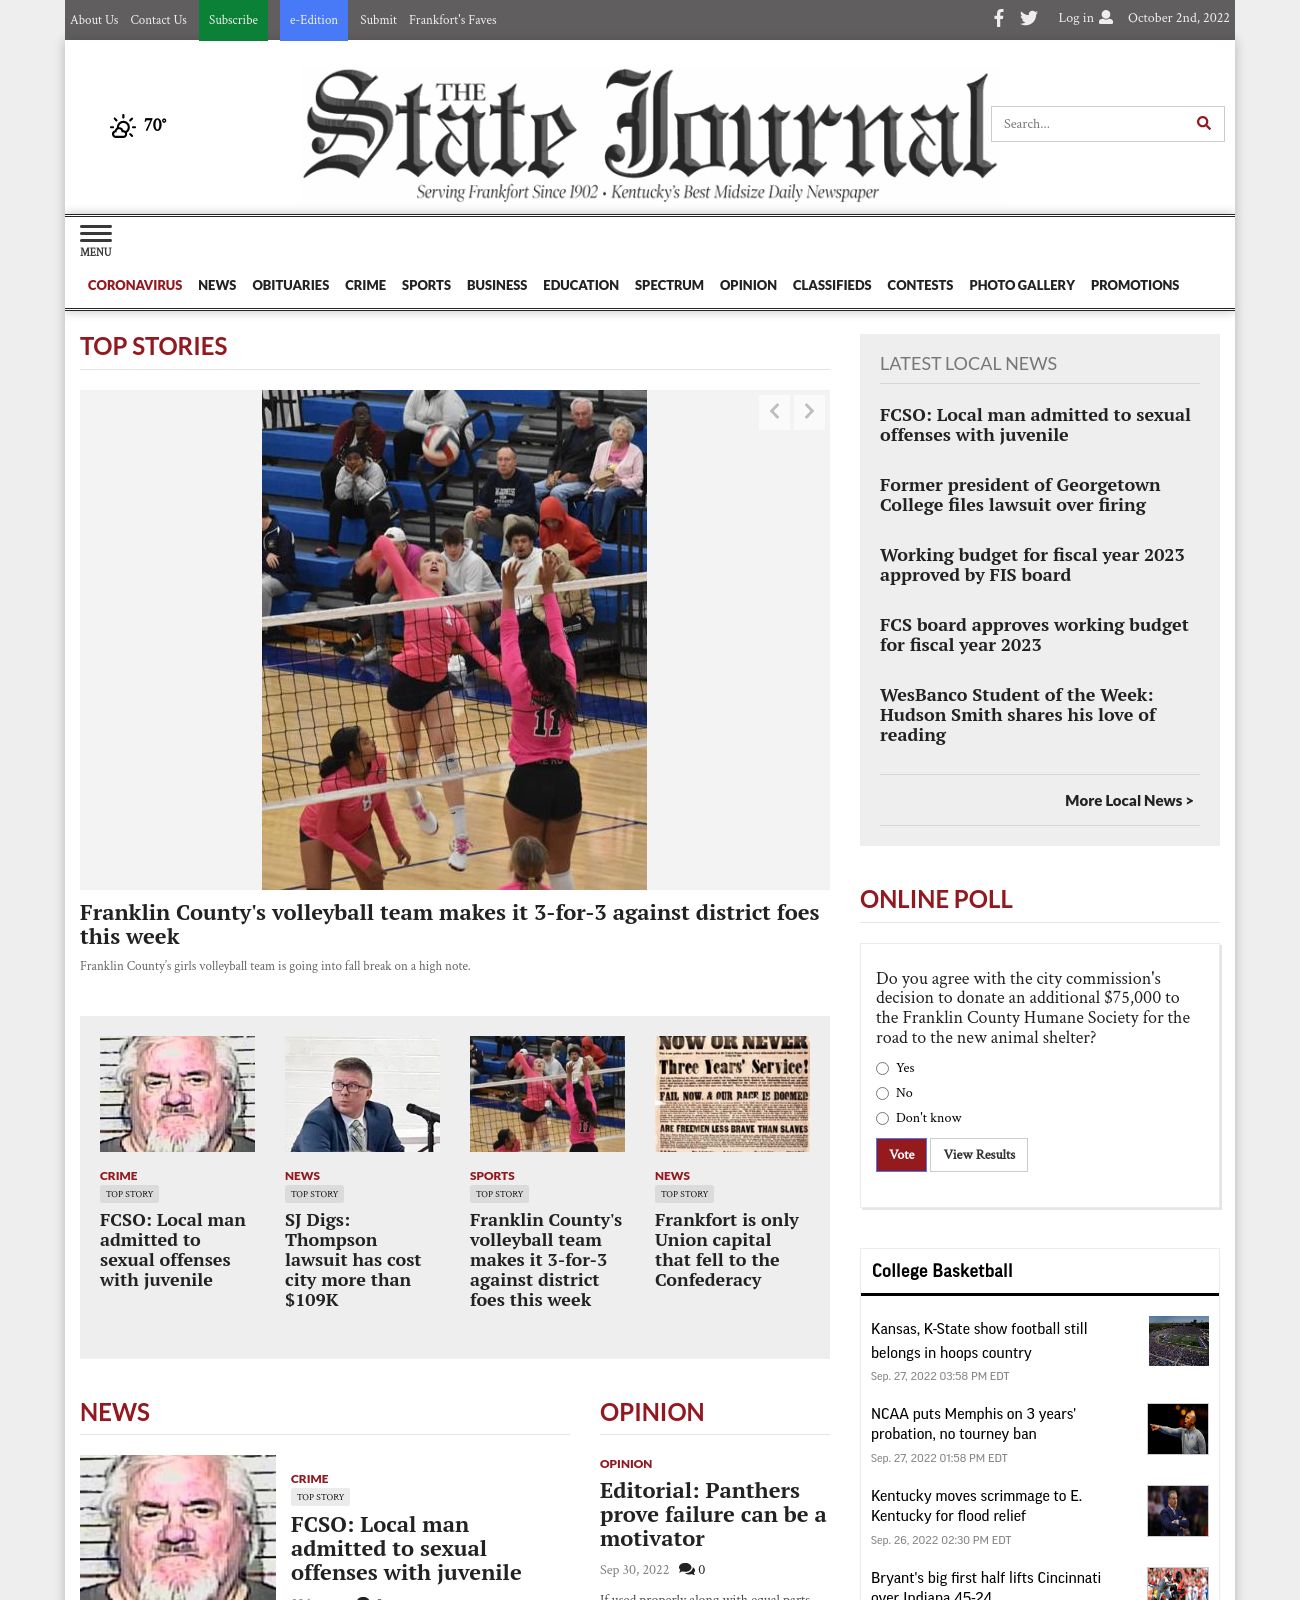 Frankfort State Journal at 2022-10-02 15:36:38-04:00 local time